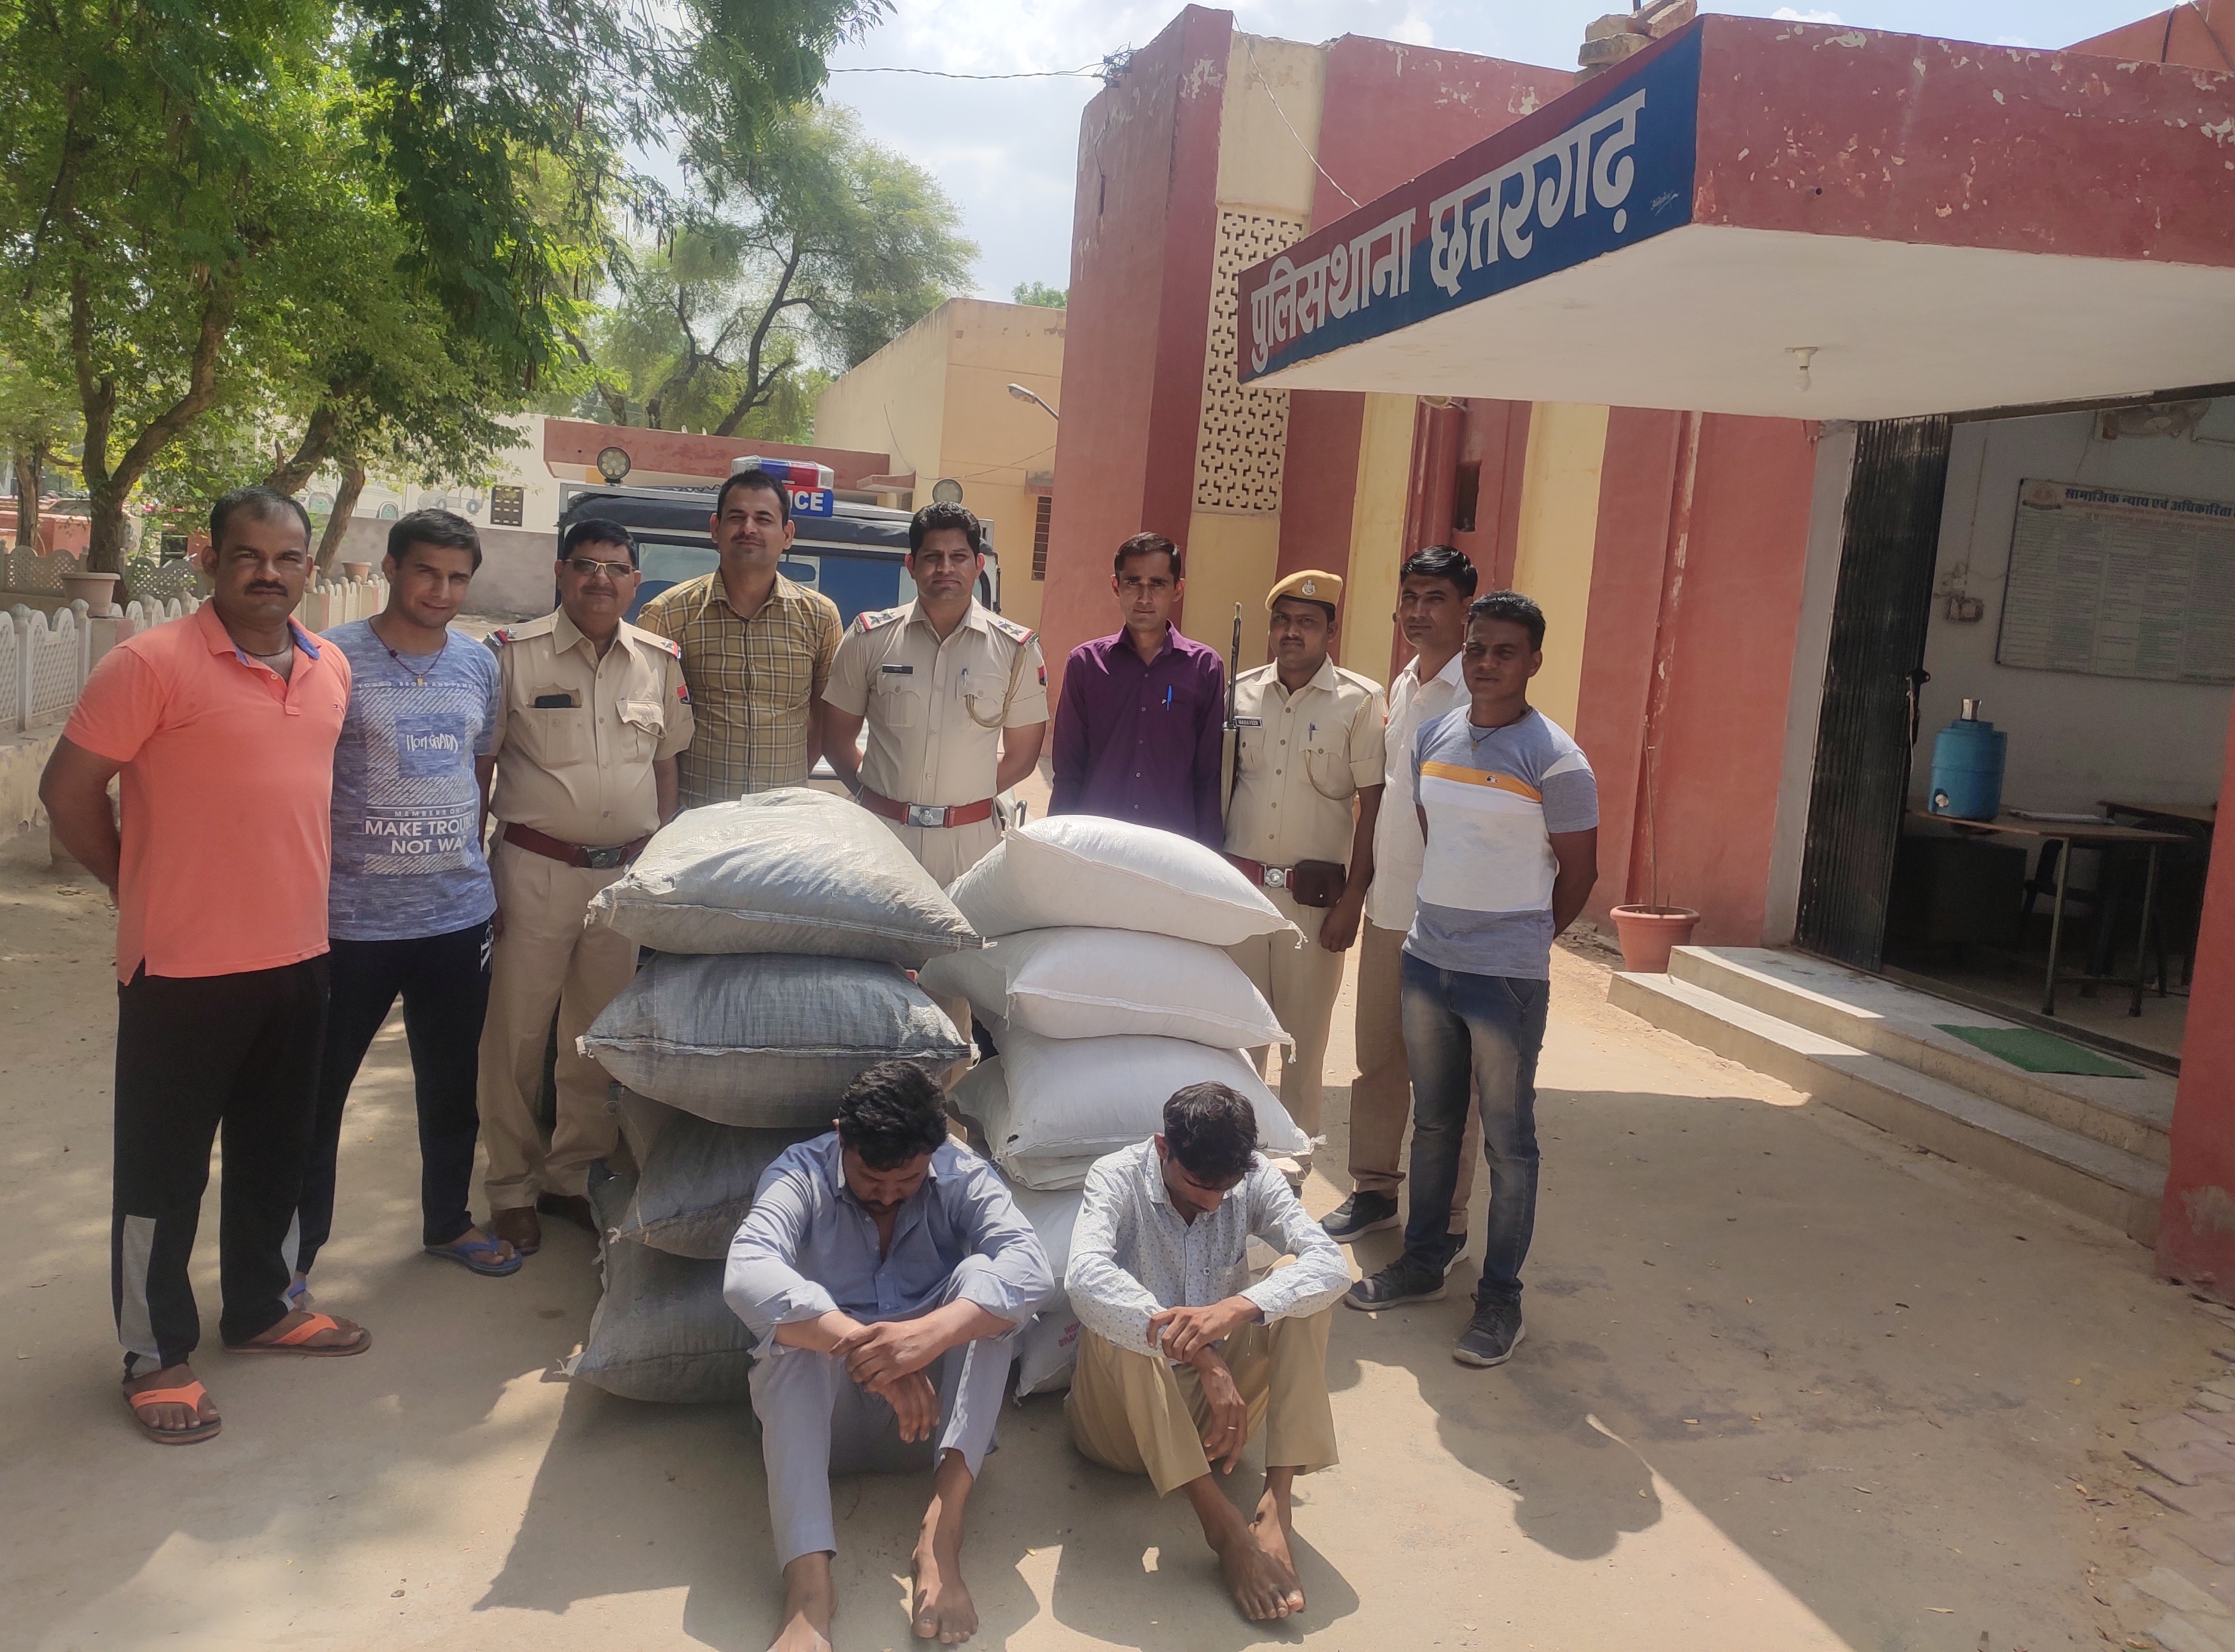 bikaner- Two arrested with 1.30 quintal doda post, two cars seized